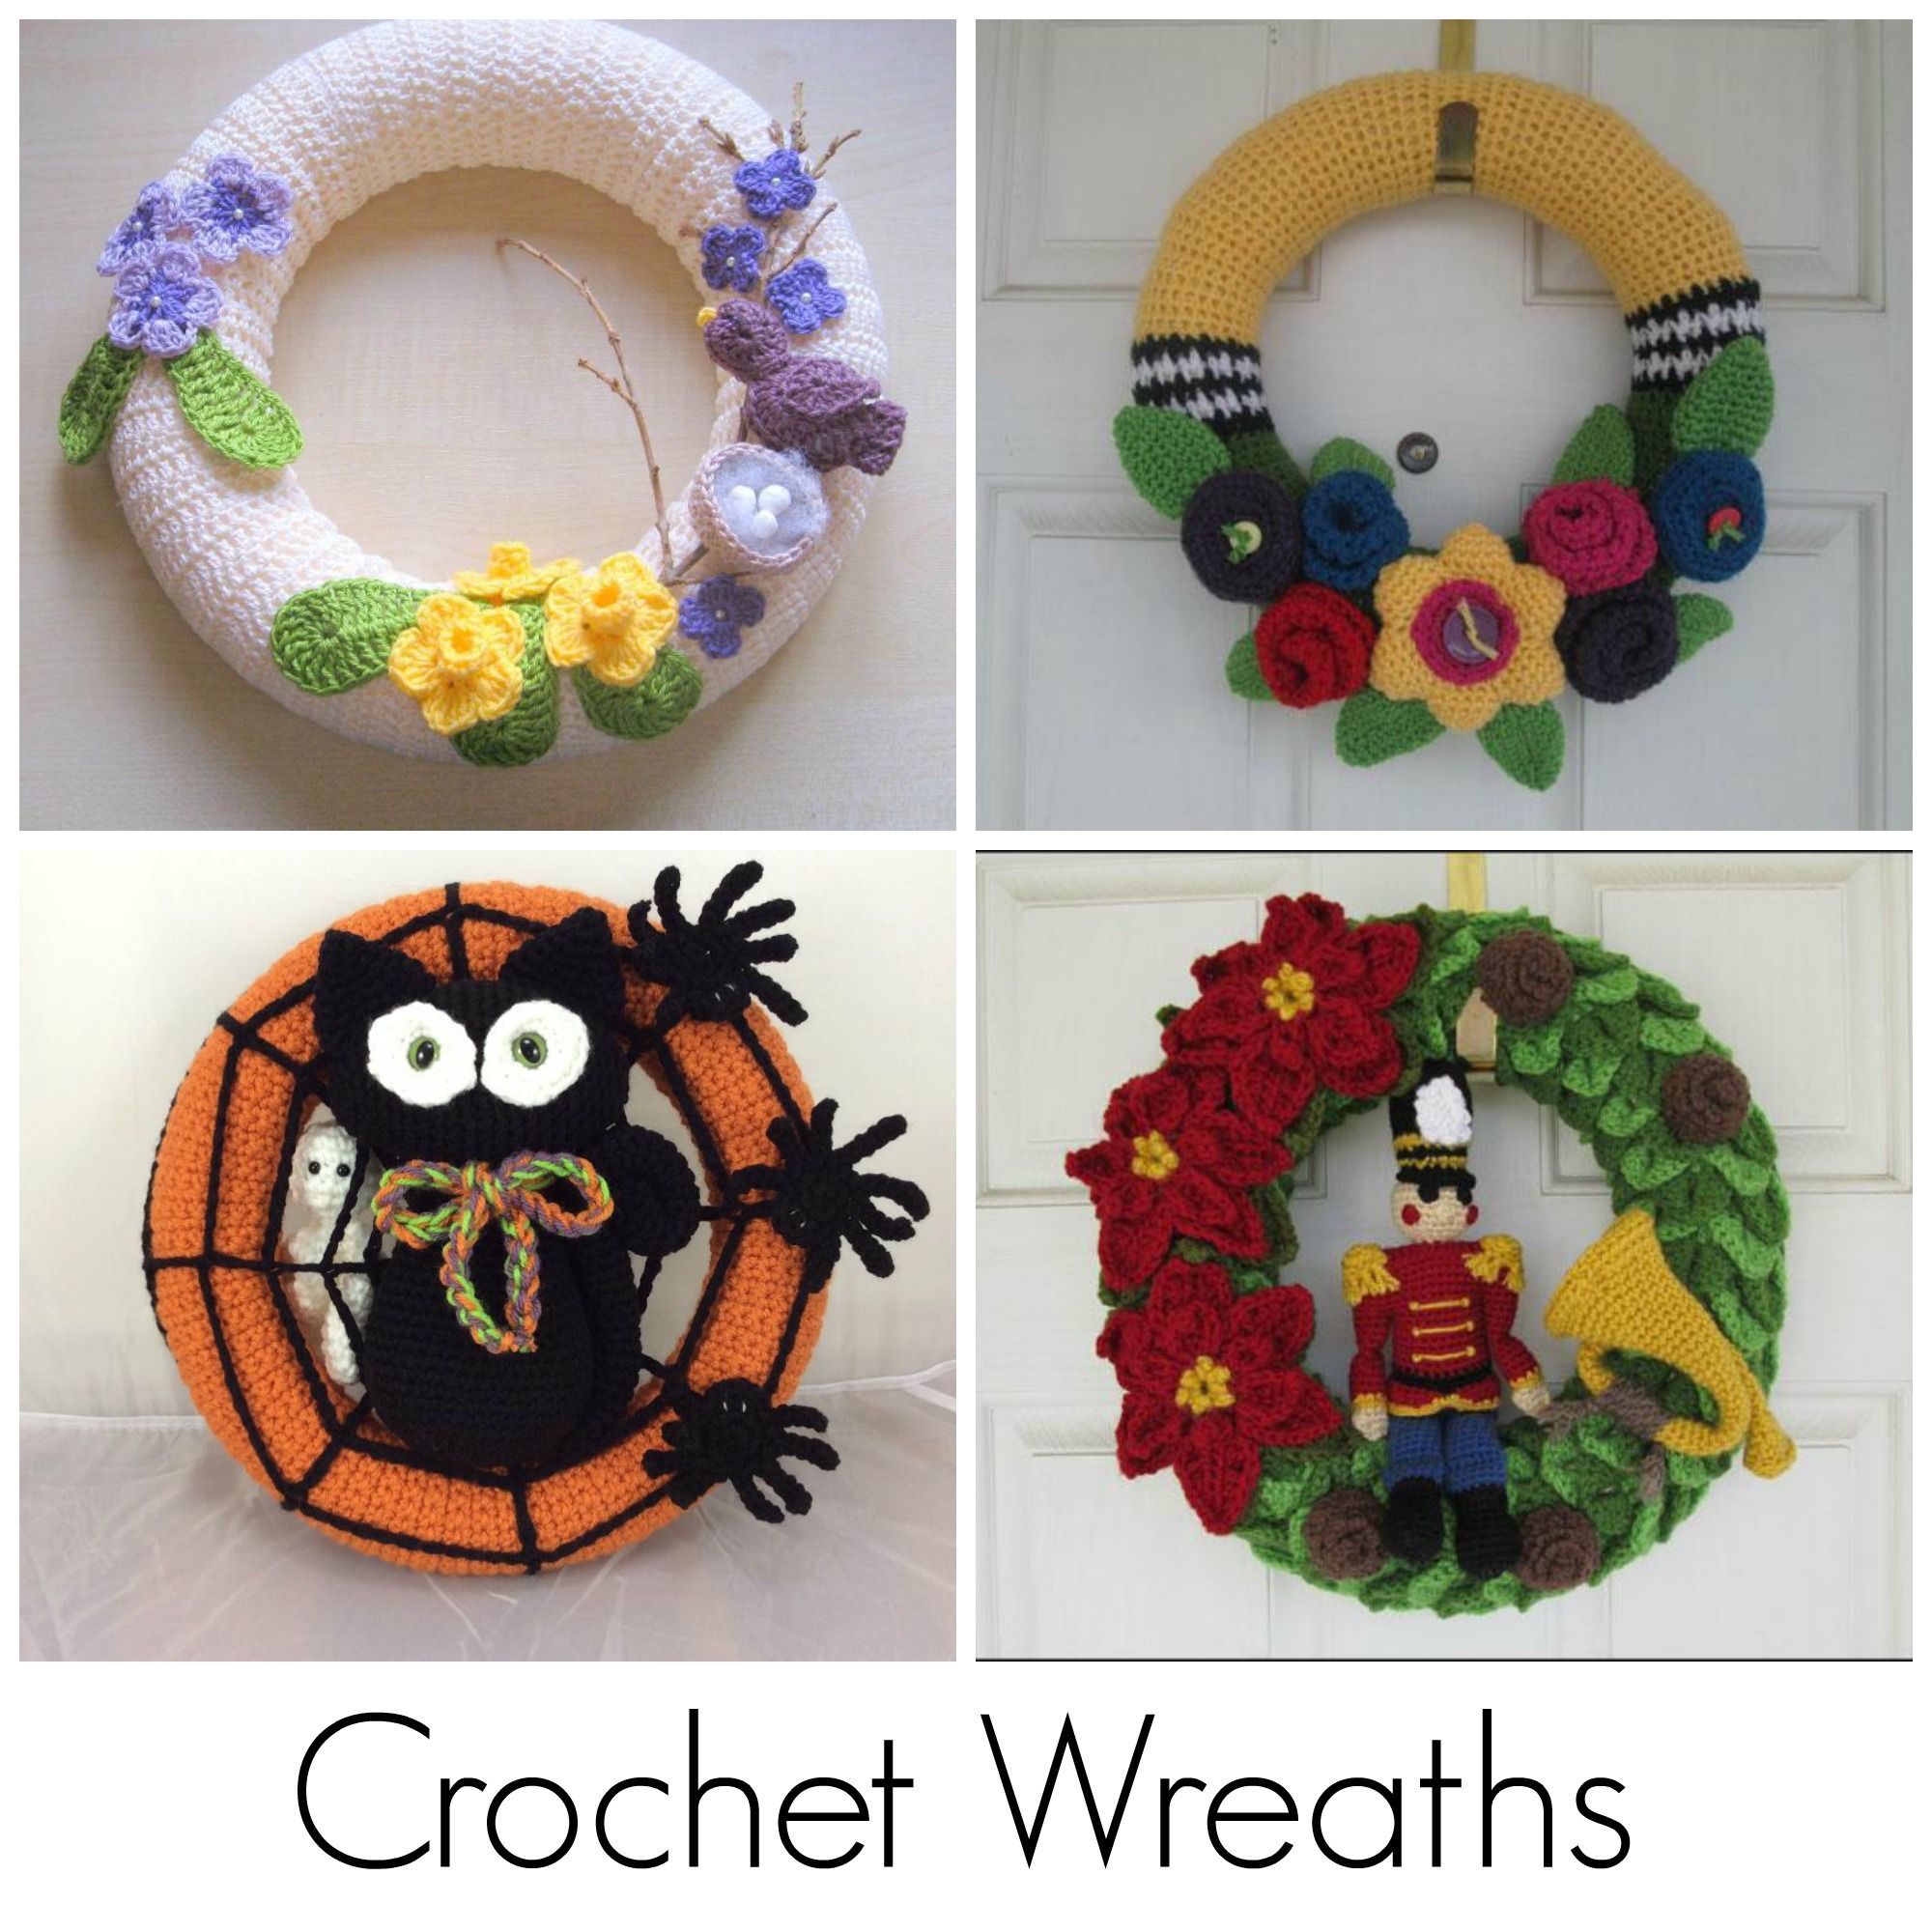 Crochet Wreath Patterns For Every Season Pertaining To Floral Patterned Over The Door Wall Decor (View 28 of 30)